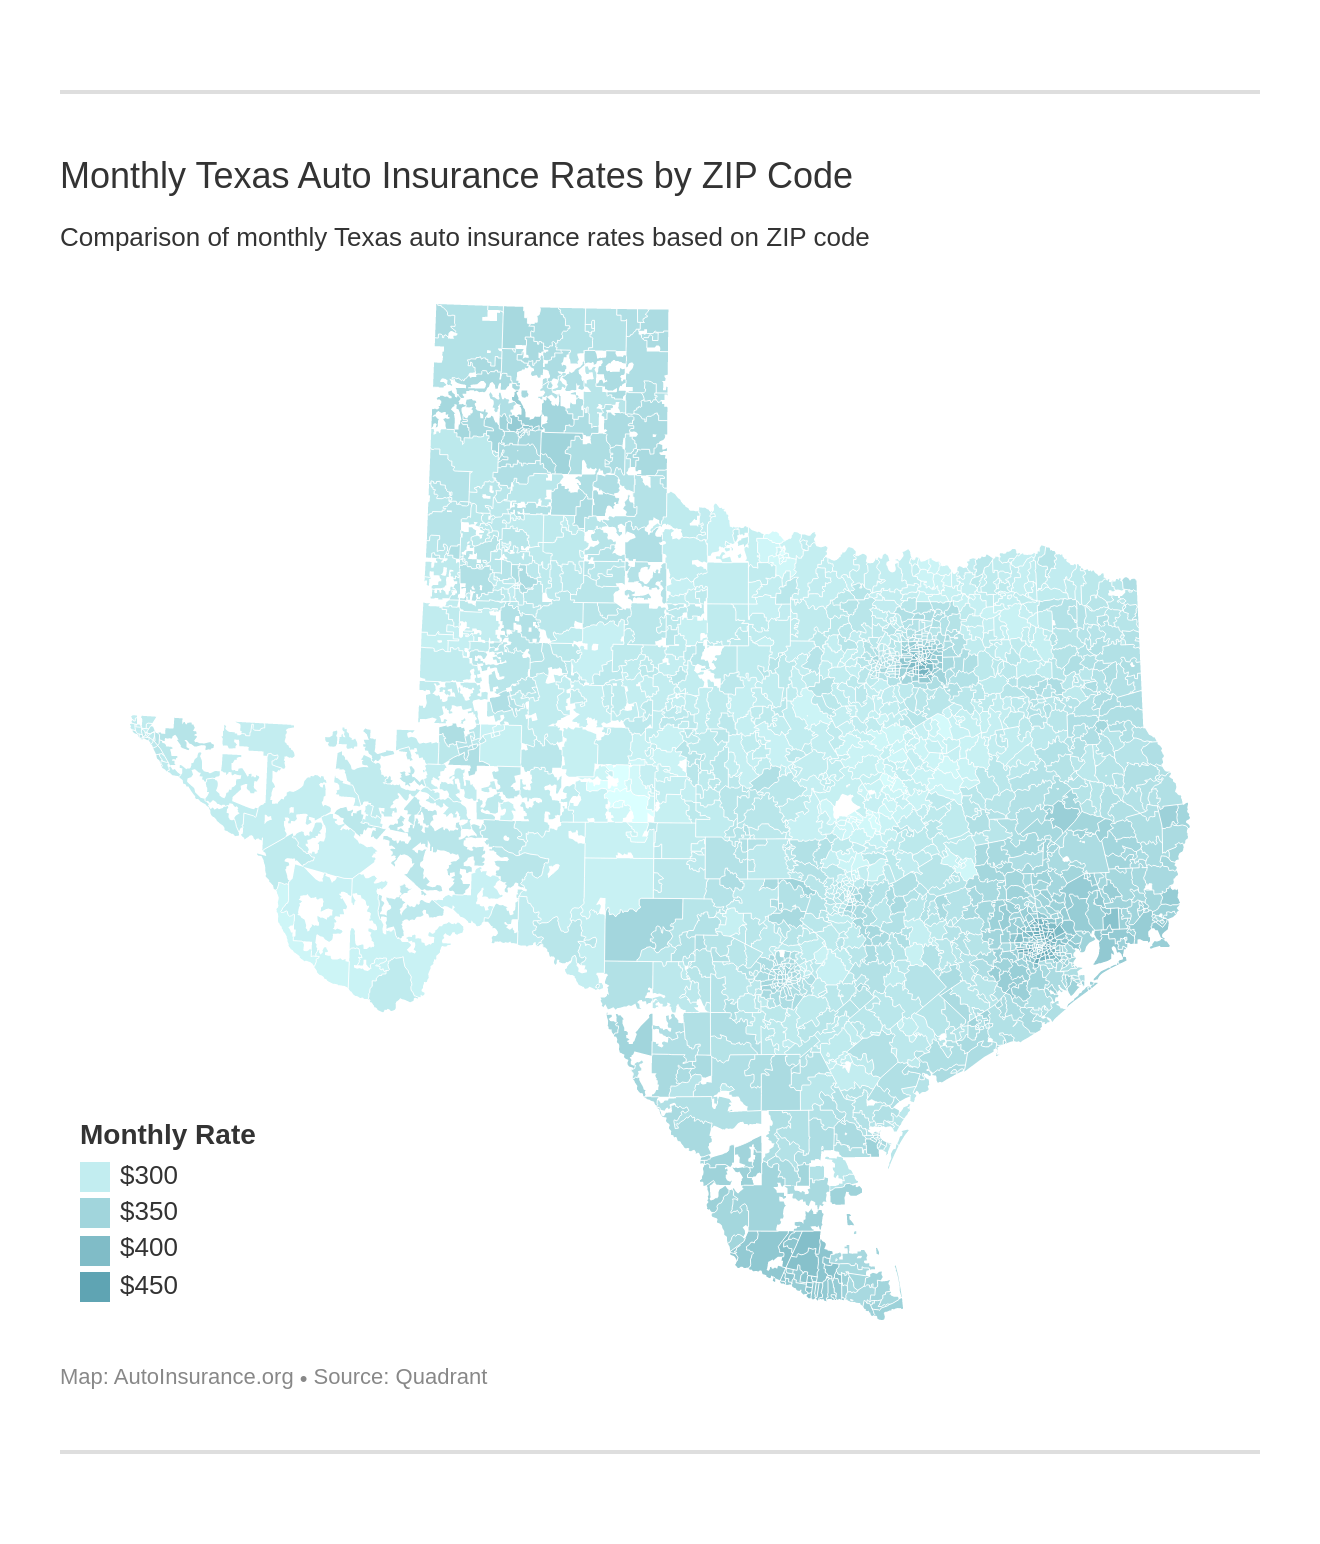 Monthly Texas Auto Insurance Rates by ZIP Code